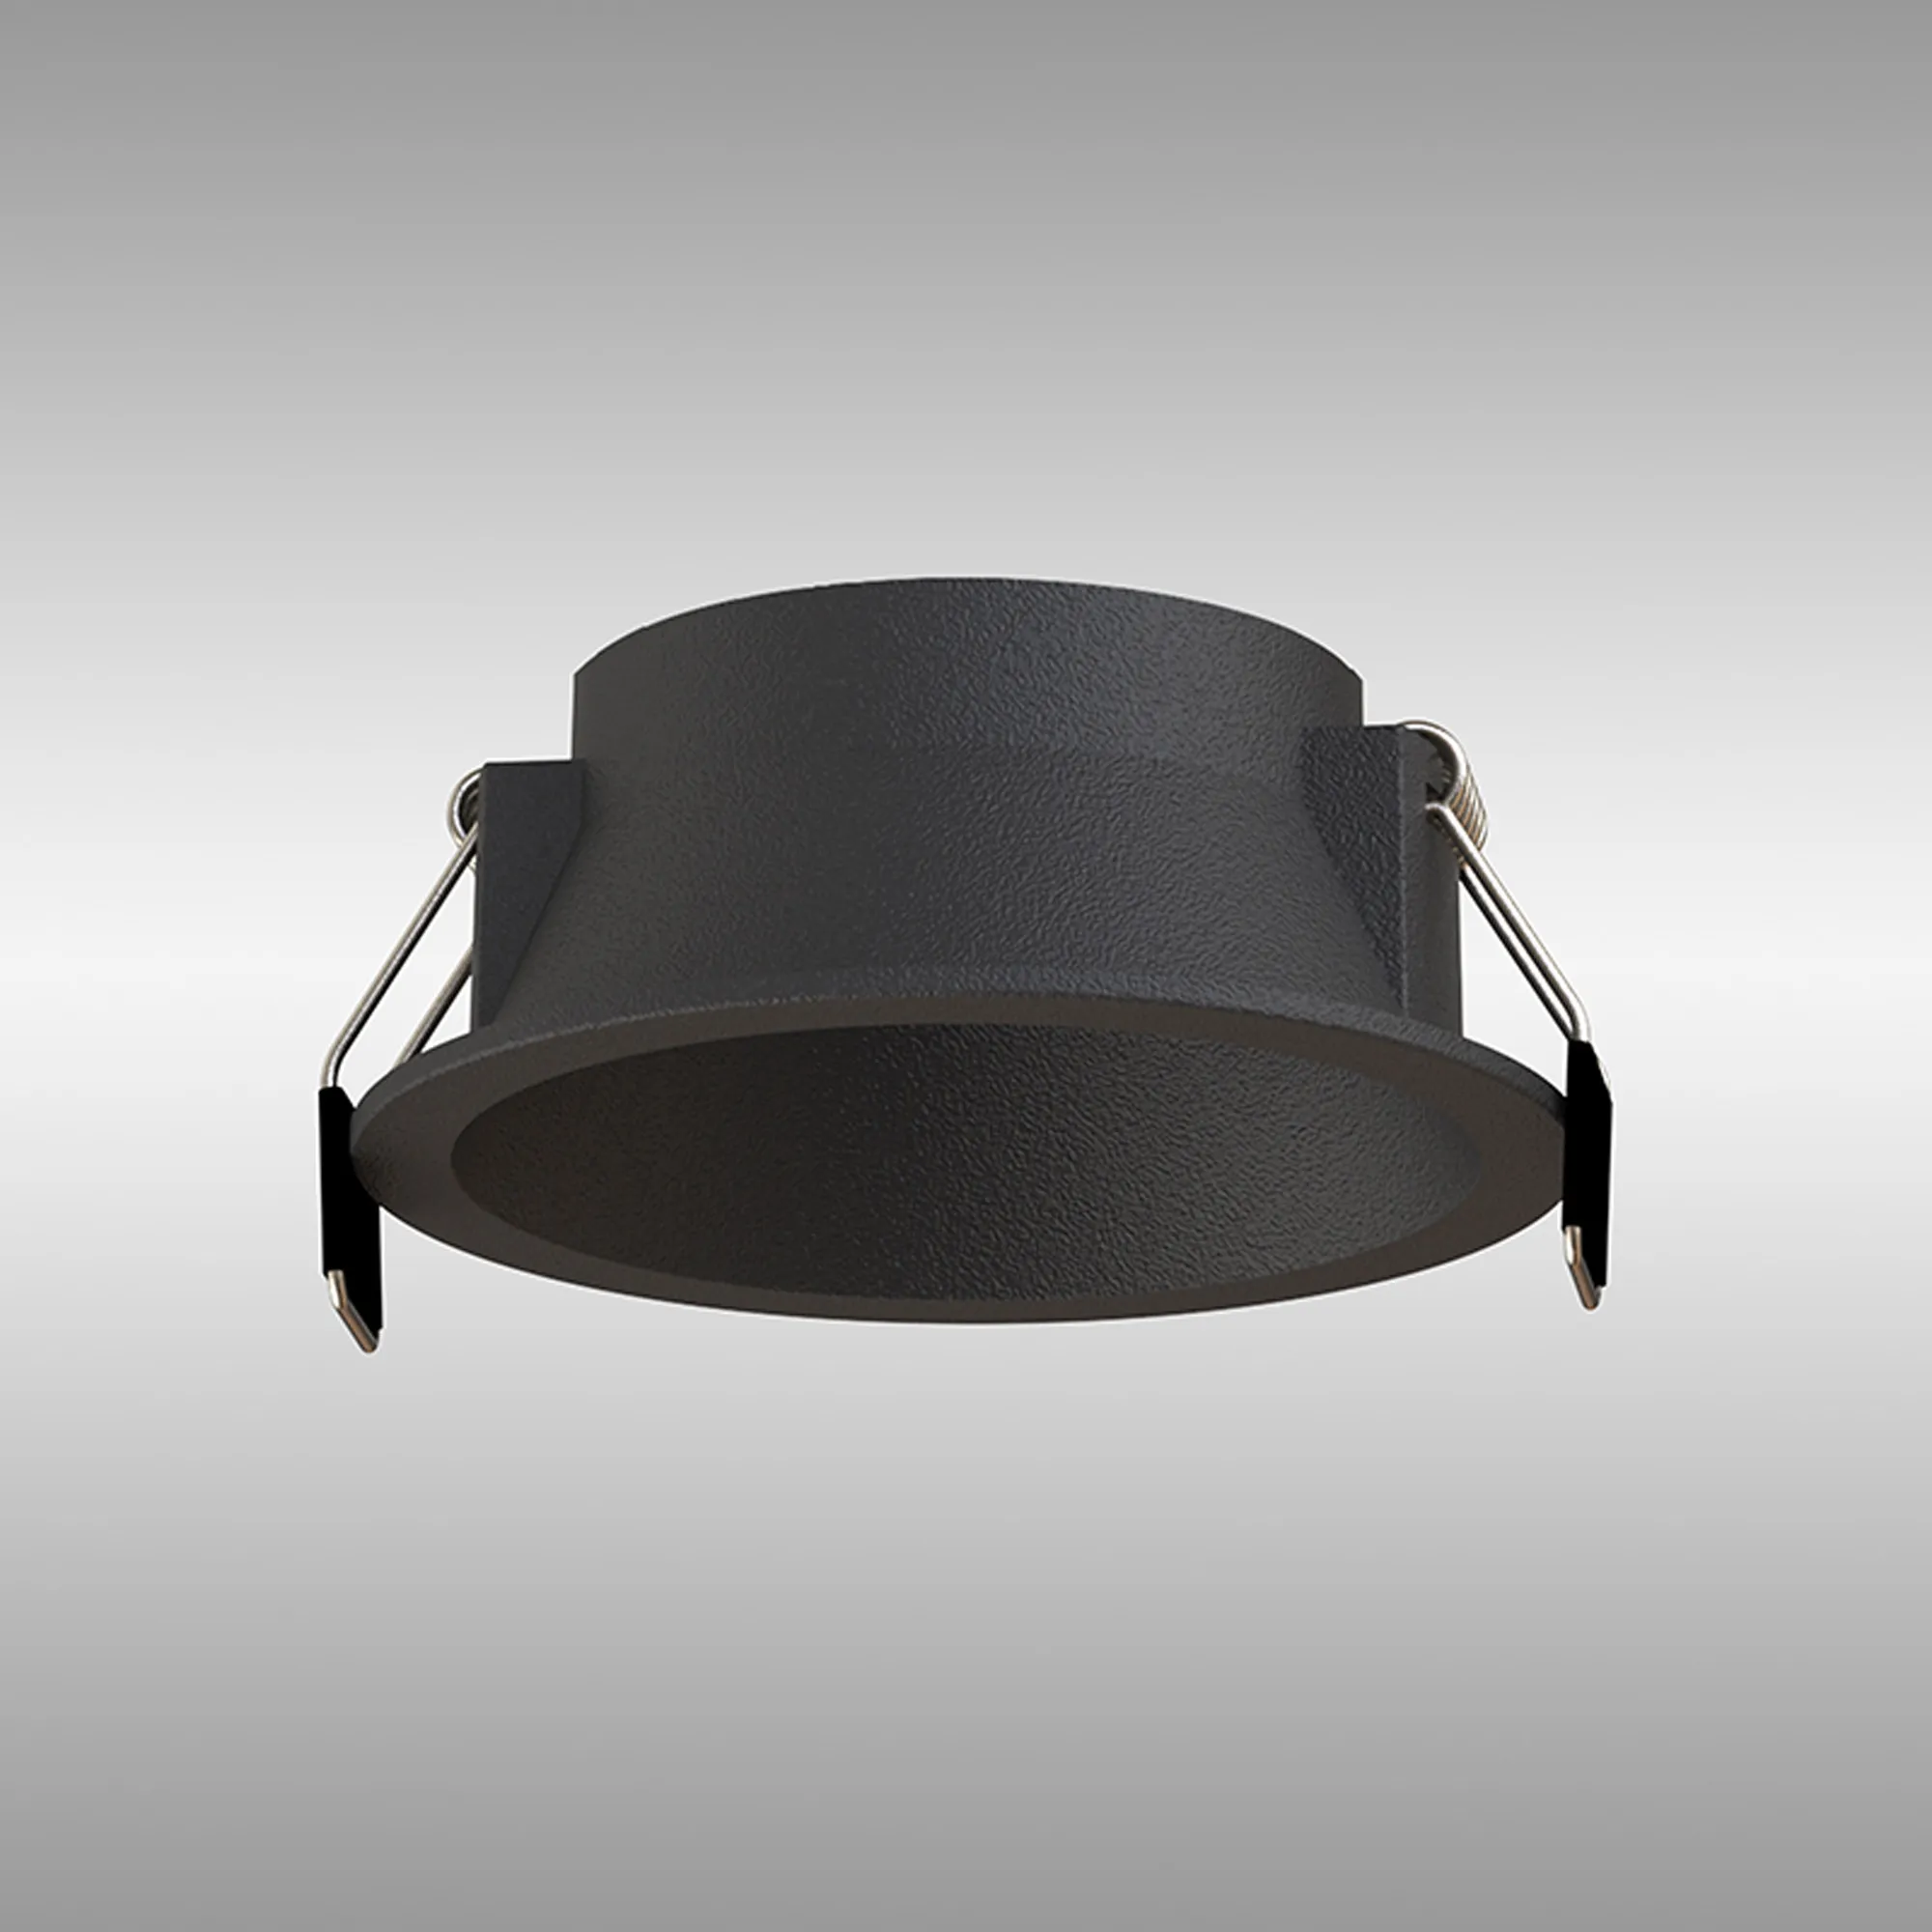 M8778  Sunset 85 x 87mm Recessed Base; Cut Out: 75mm; Black